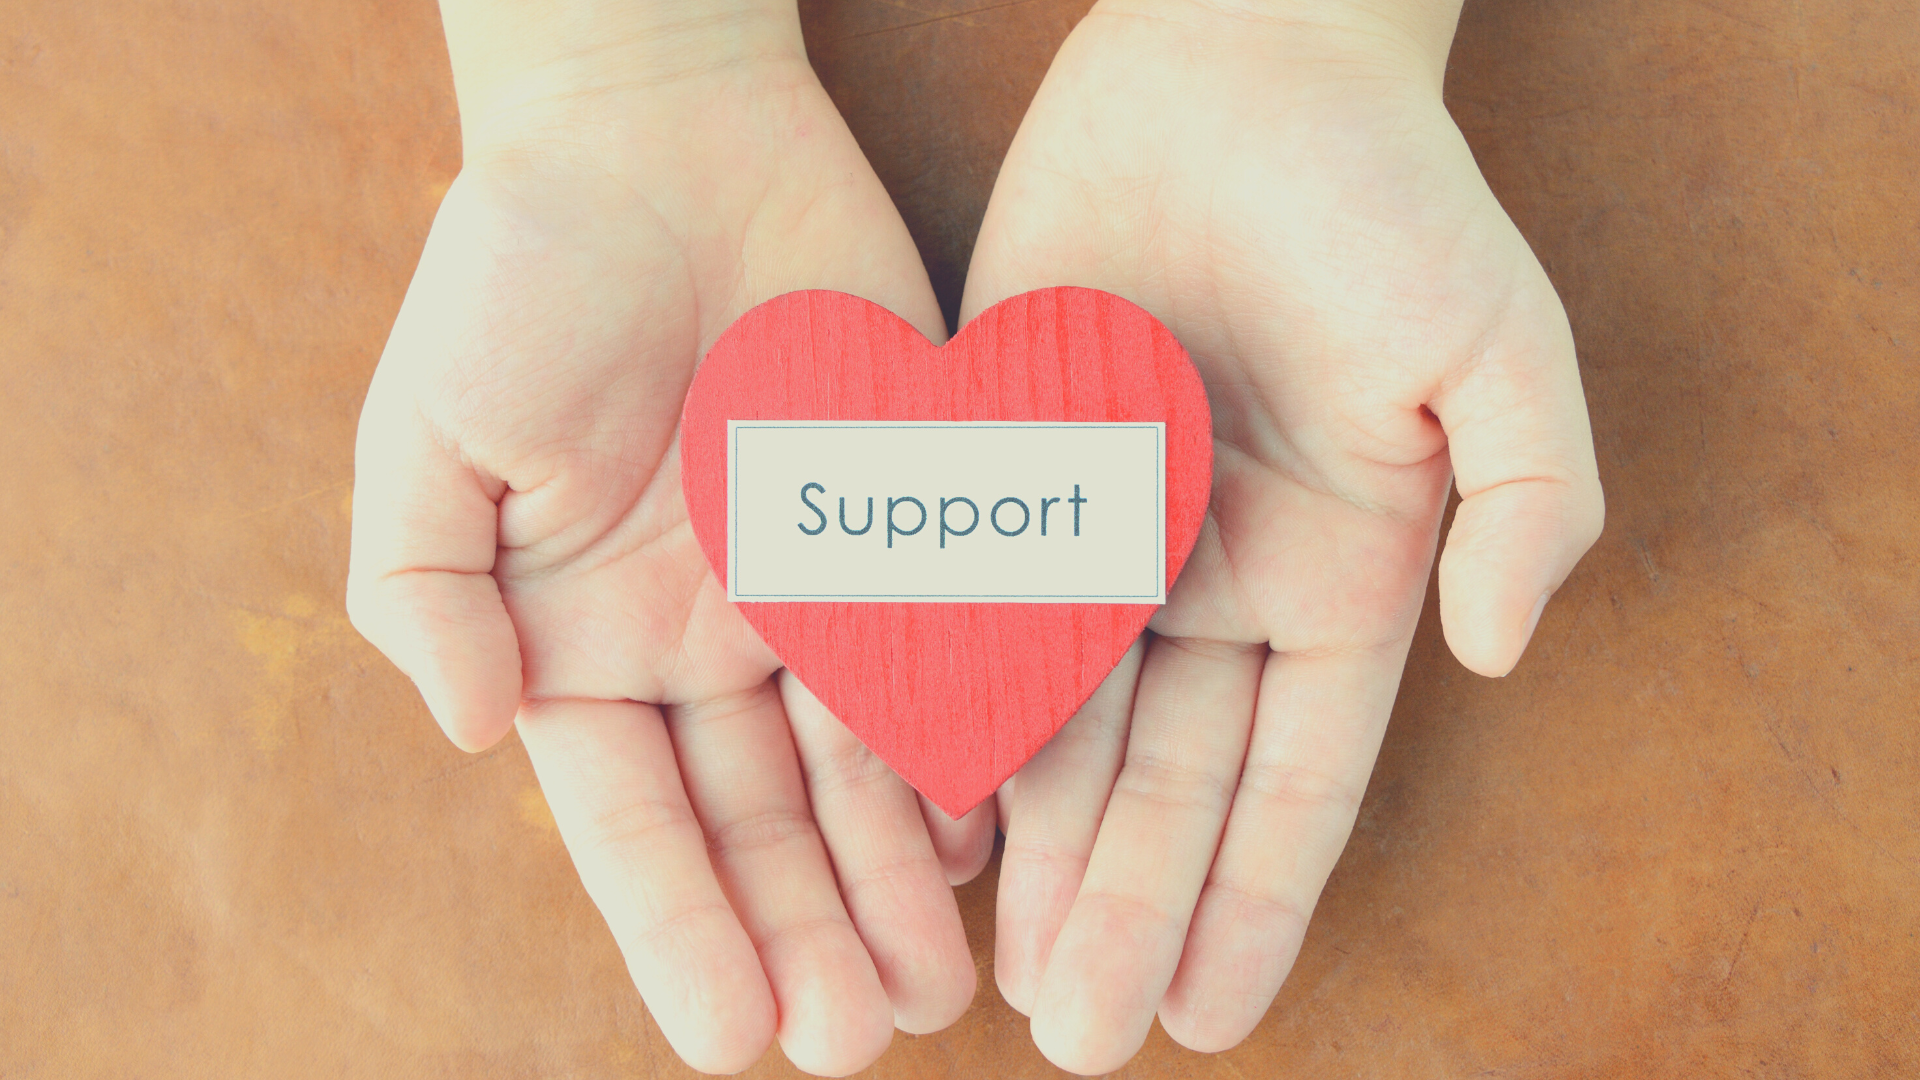 Hands holding a red cardboard heart with the word support written on it representing clinical counselling support